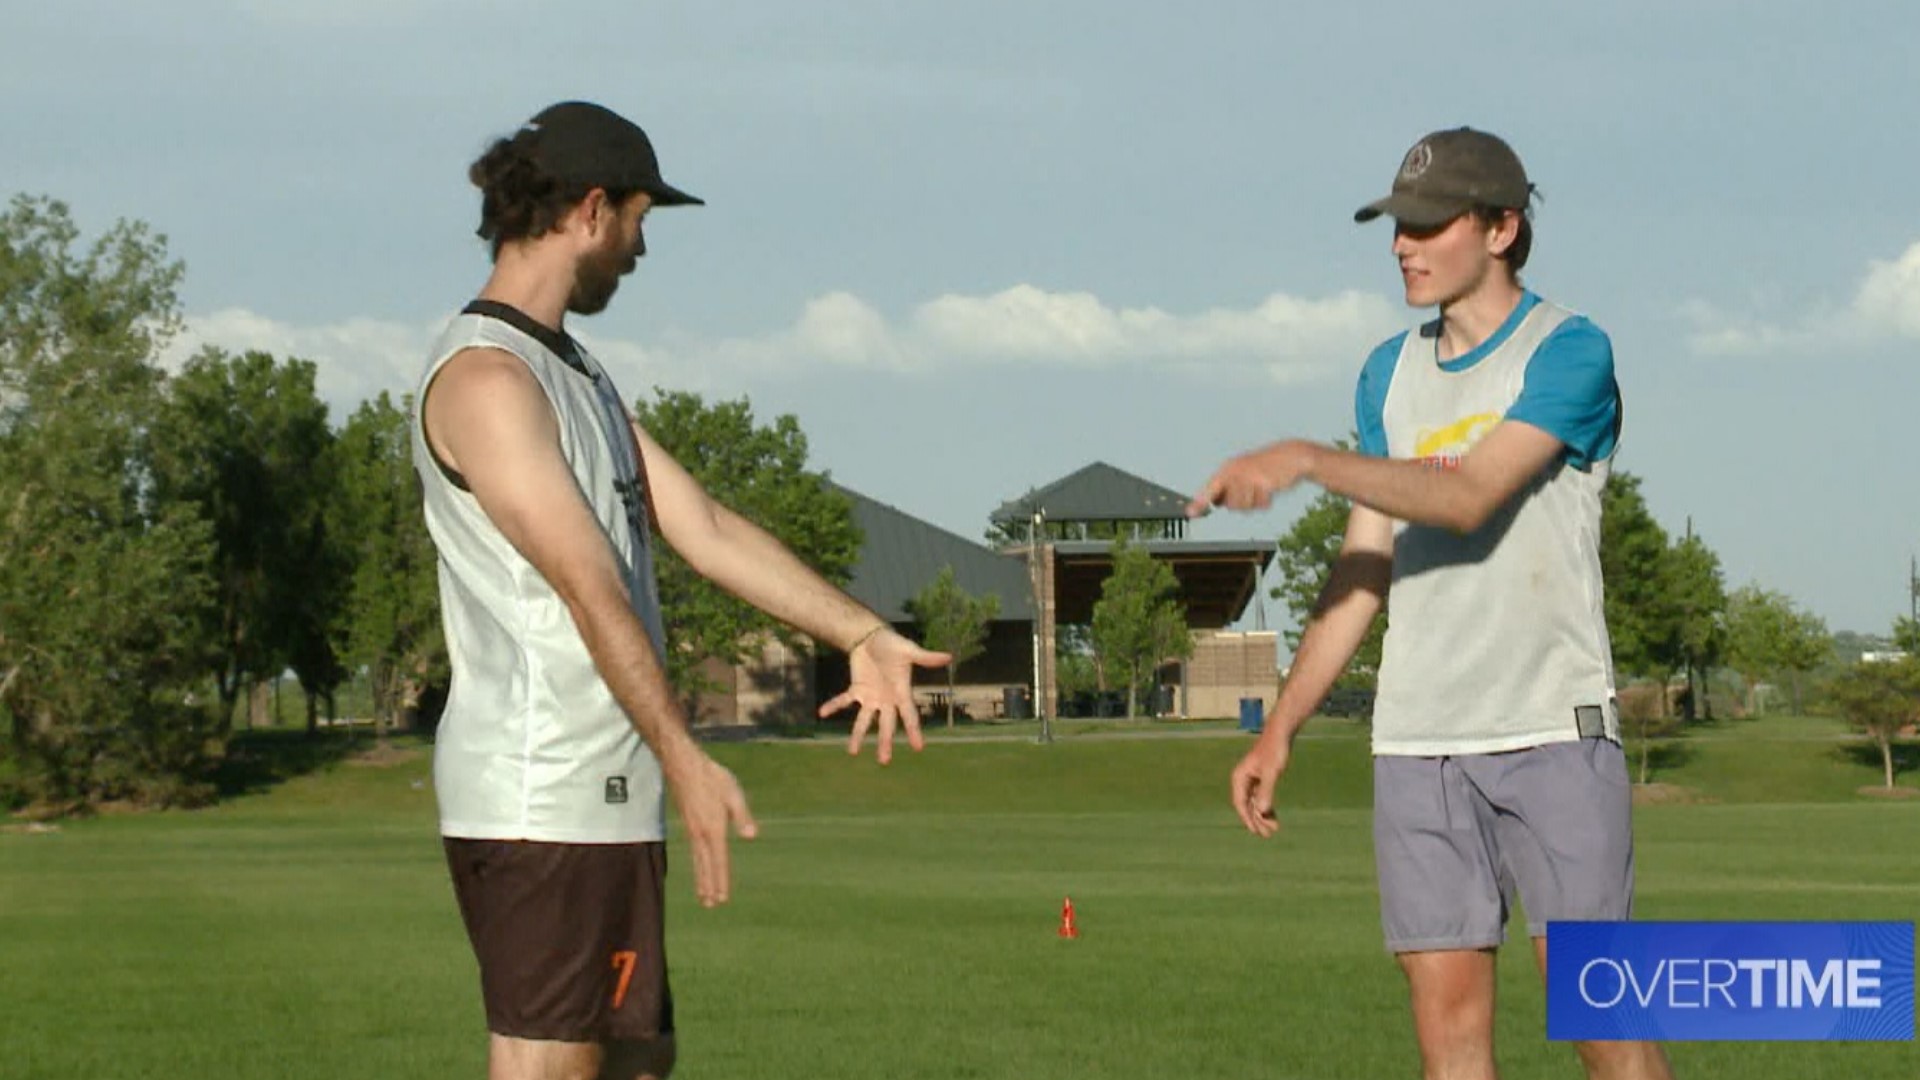 The Summit is Colorado’s newest American ultimate Disc Team.